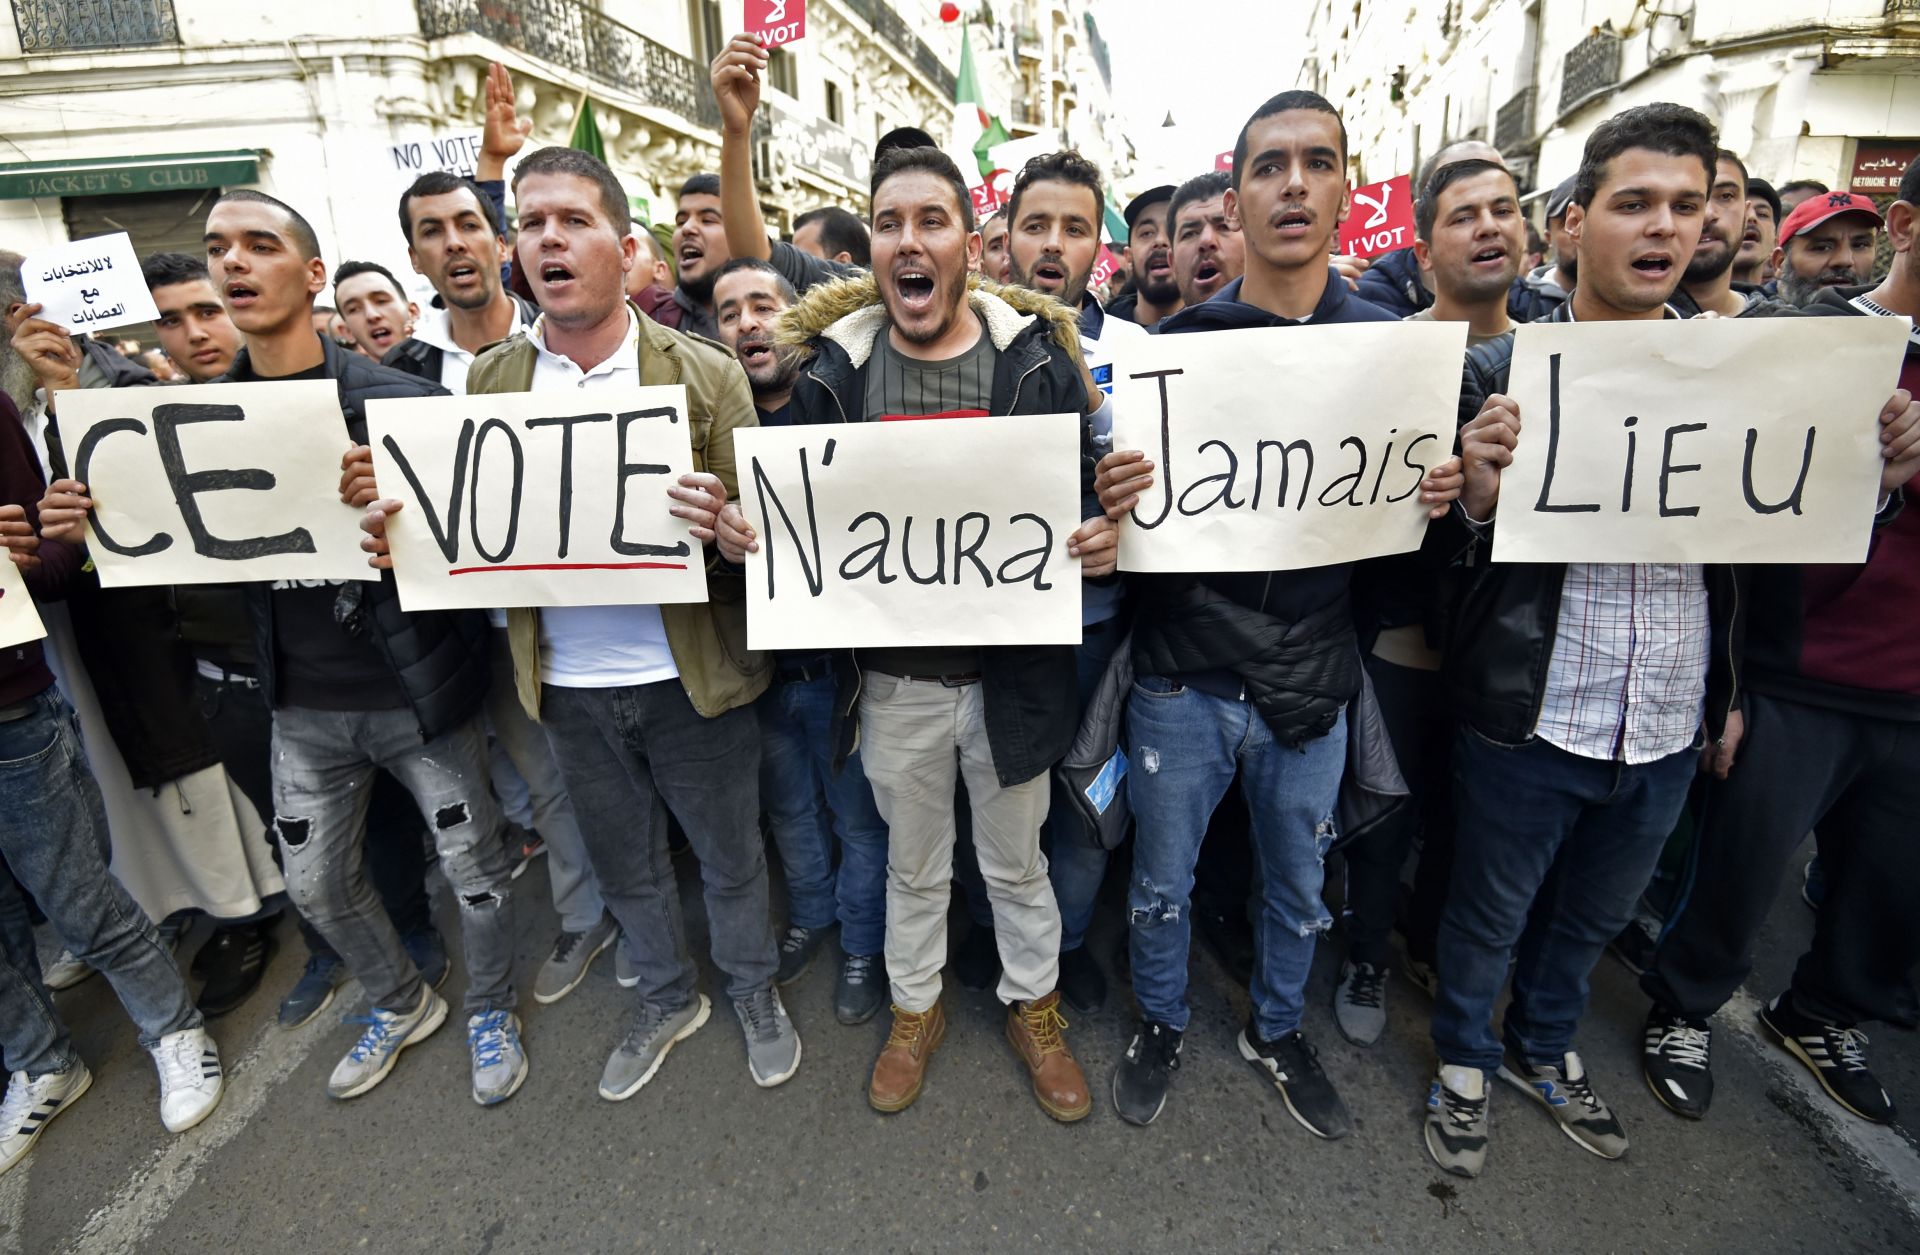 Algerian demonstrators carry placards reading "This vote will never take place" in French in regard to the Dec. 12 presidential election, during a march in Algiers on Dec. 6, 2019.